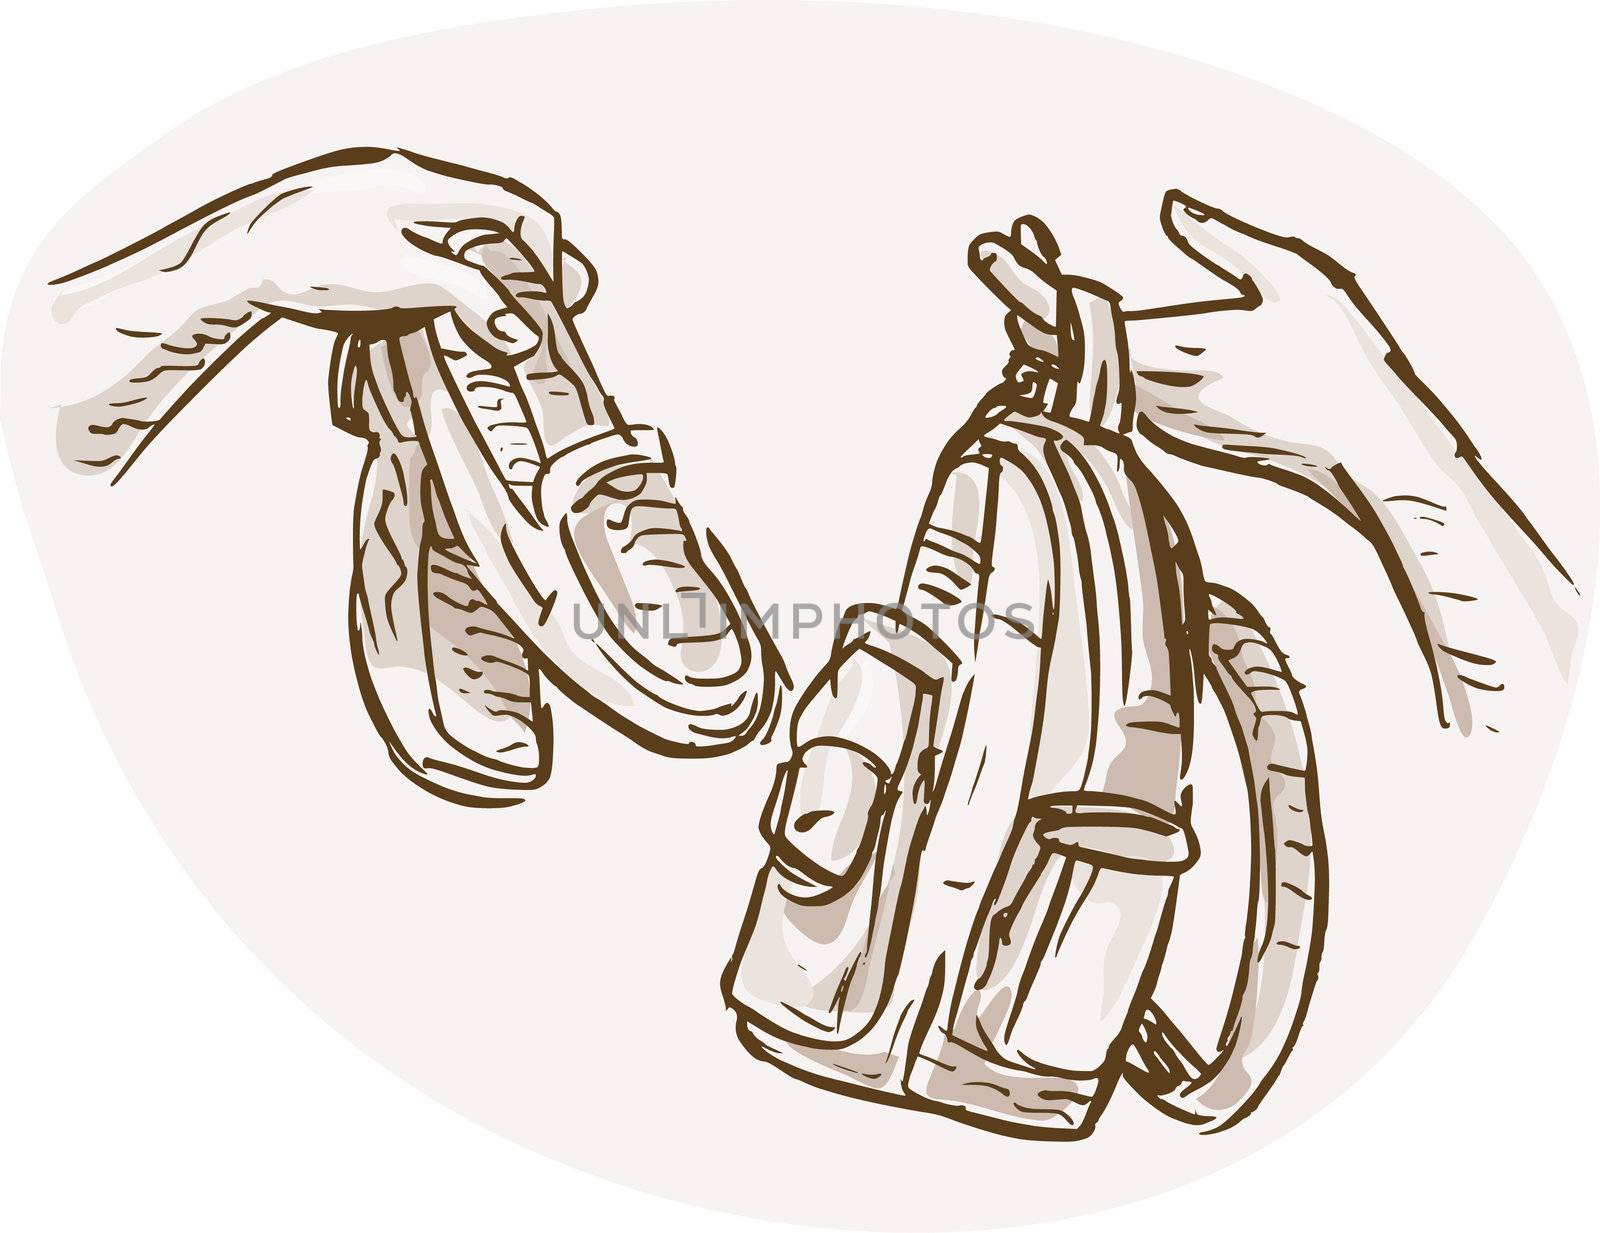 hand drawn sketched illustration of Hands Barter trading or swapping shoes and backpack or bag.